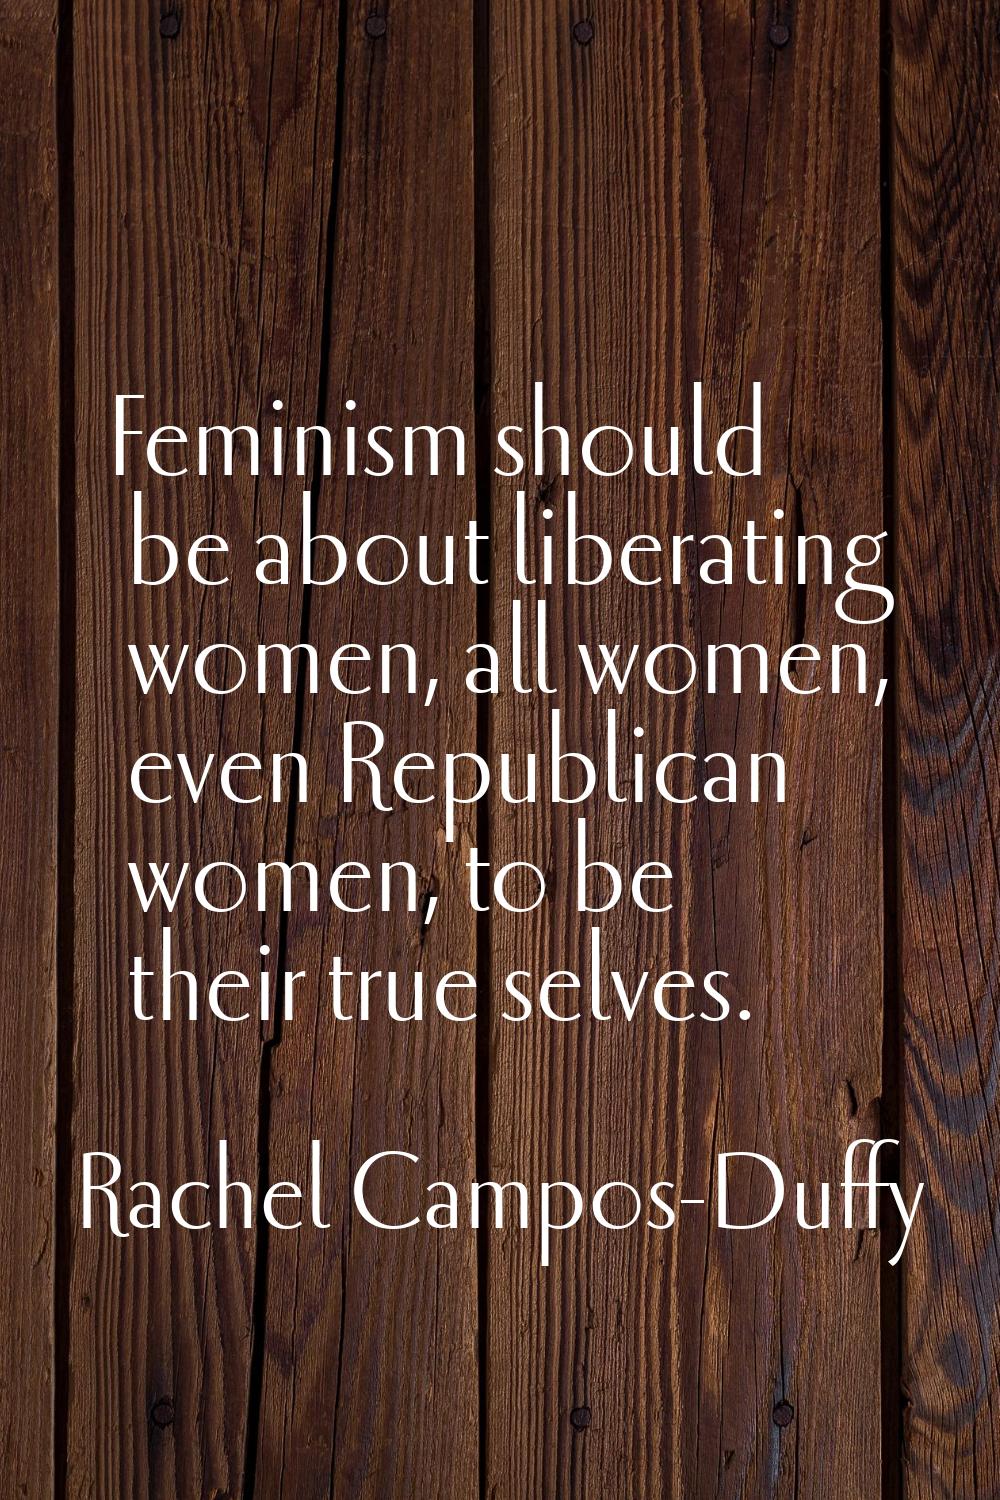 Feminism should be about liberating women, all women, even Republican women, to be their true selve